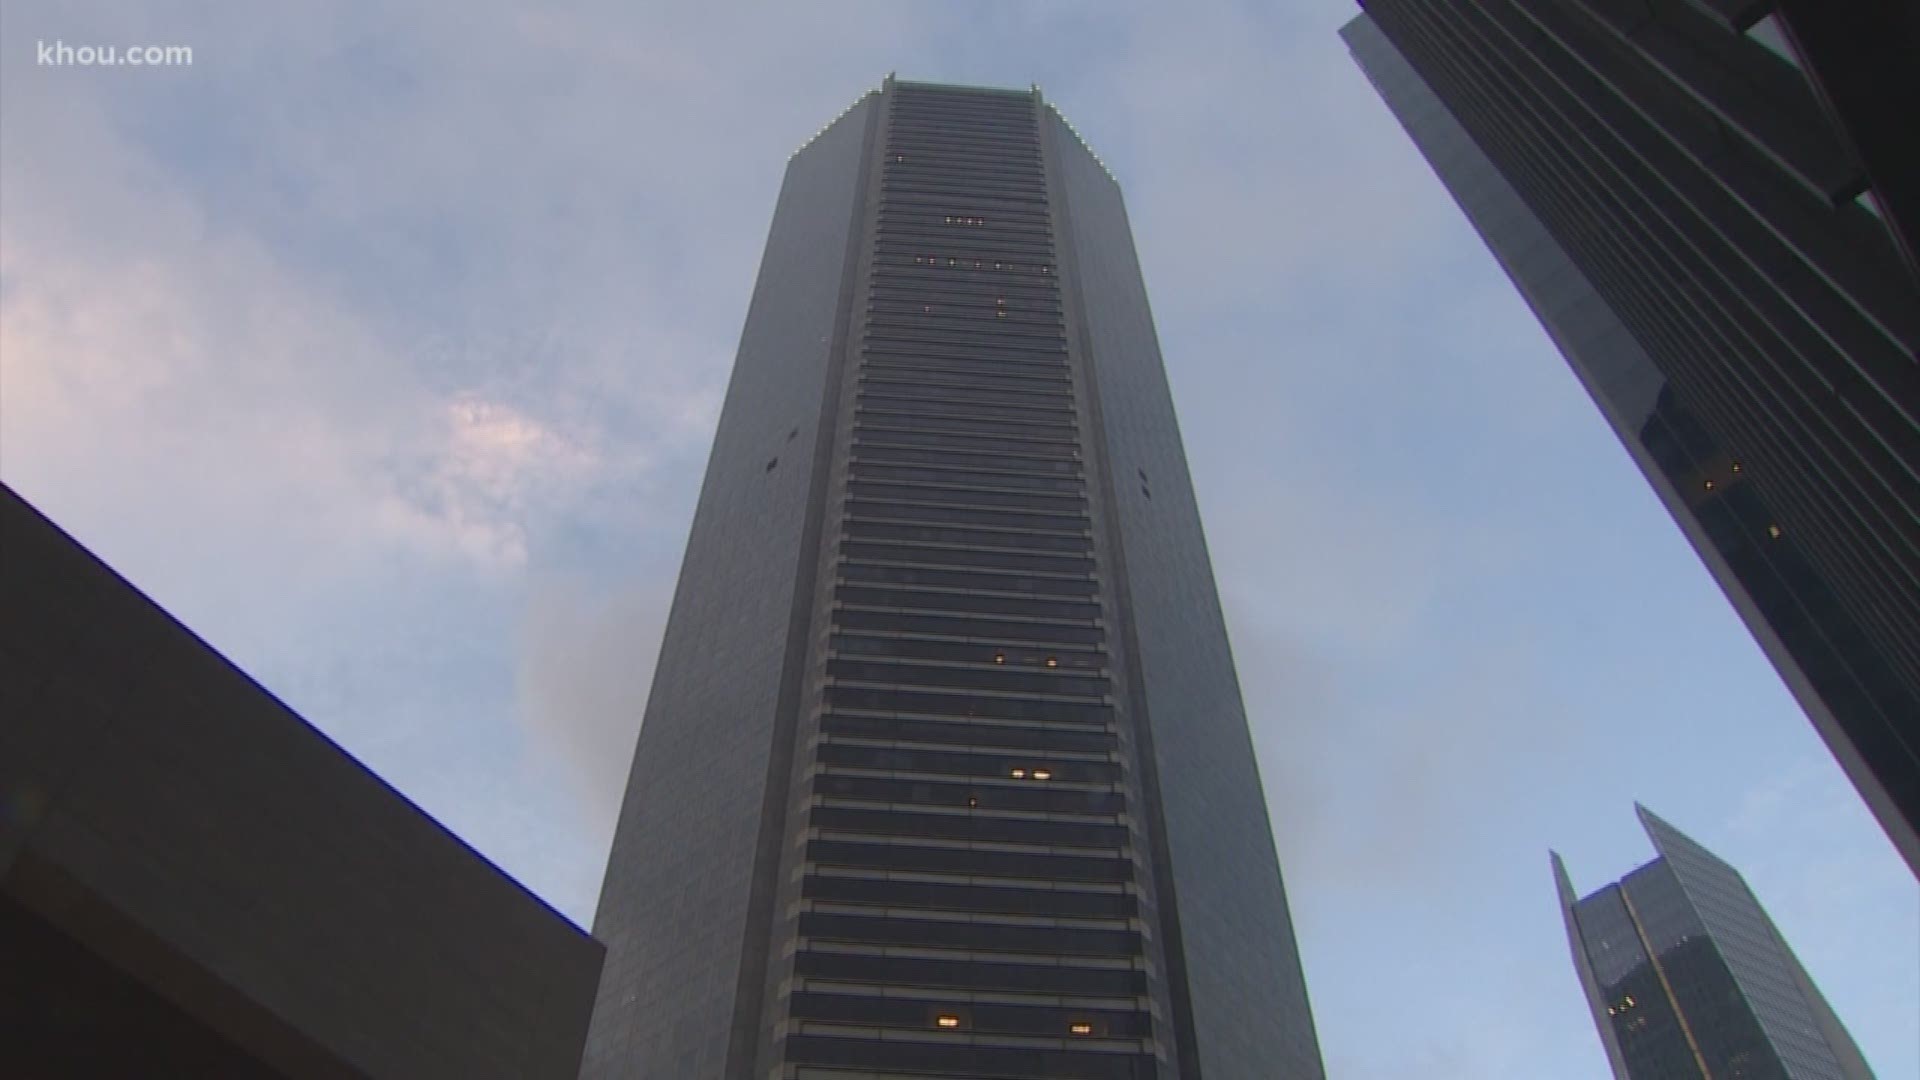 The downtown Houston skyscraper commonly called JPMorgan Chase Tower and the adjacent Chase Center building reportedly are being sold in a deal that could be worth $627 million. The tower, at 600 Travis St., was completed in 1982 for Texas Commerce Bancshares and is the tallest building in Texas at 75 stories.